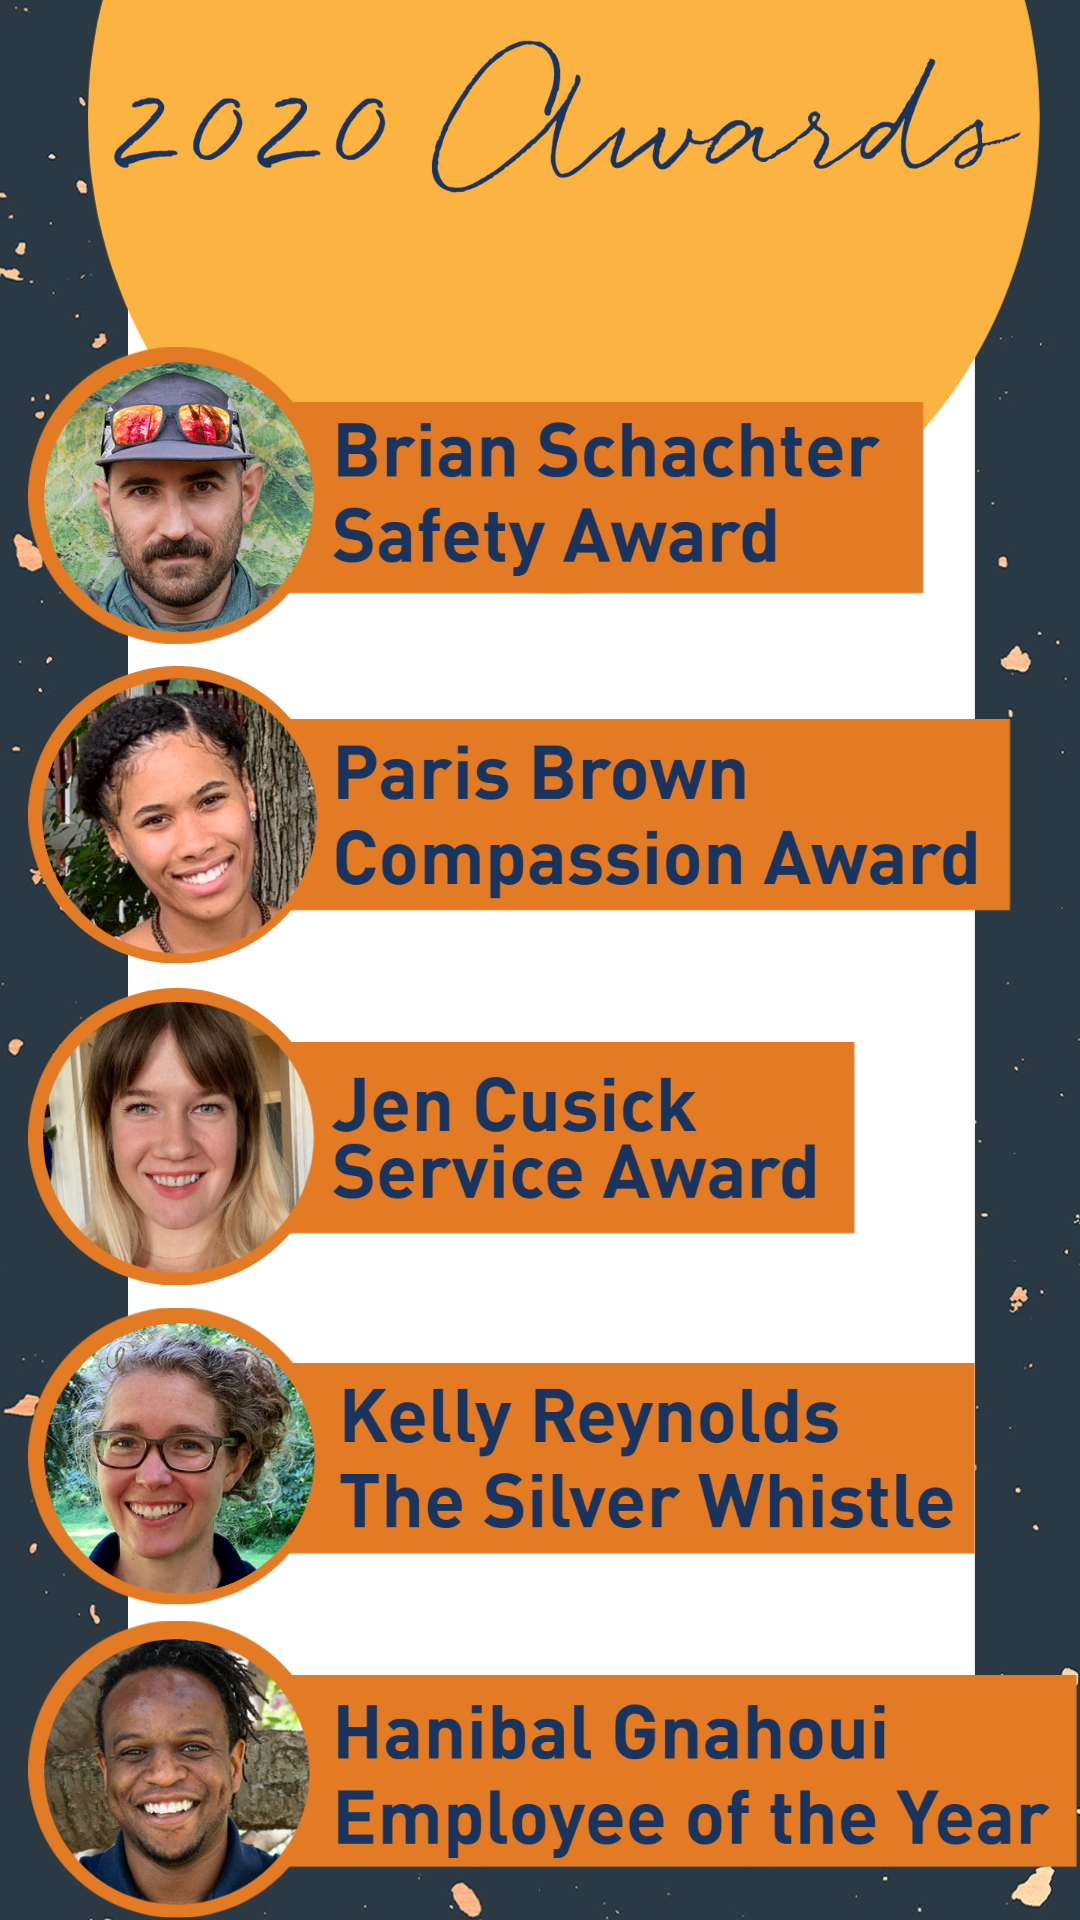 Brian Schachter Safety Award; Paris Brown Compassion Award; Jen Cusick Service Award; Kelly Reynolds The Silver Whistle; Hanibal Gnahoui Employee of the Year